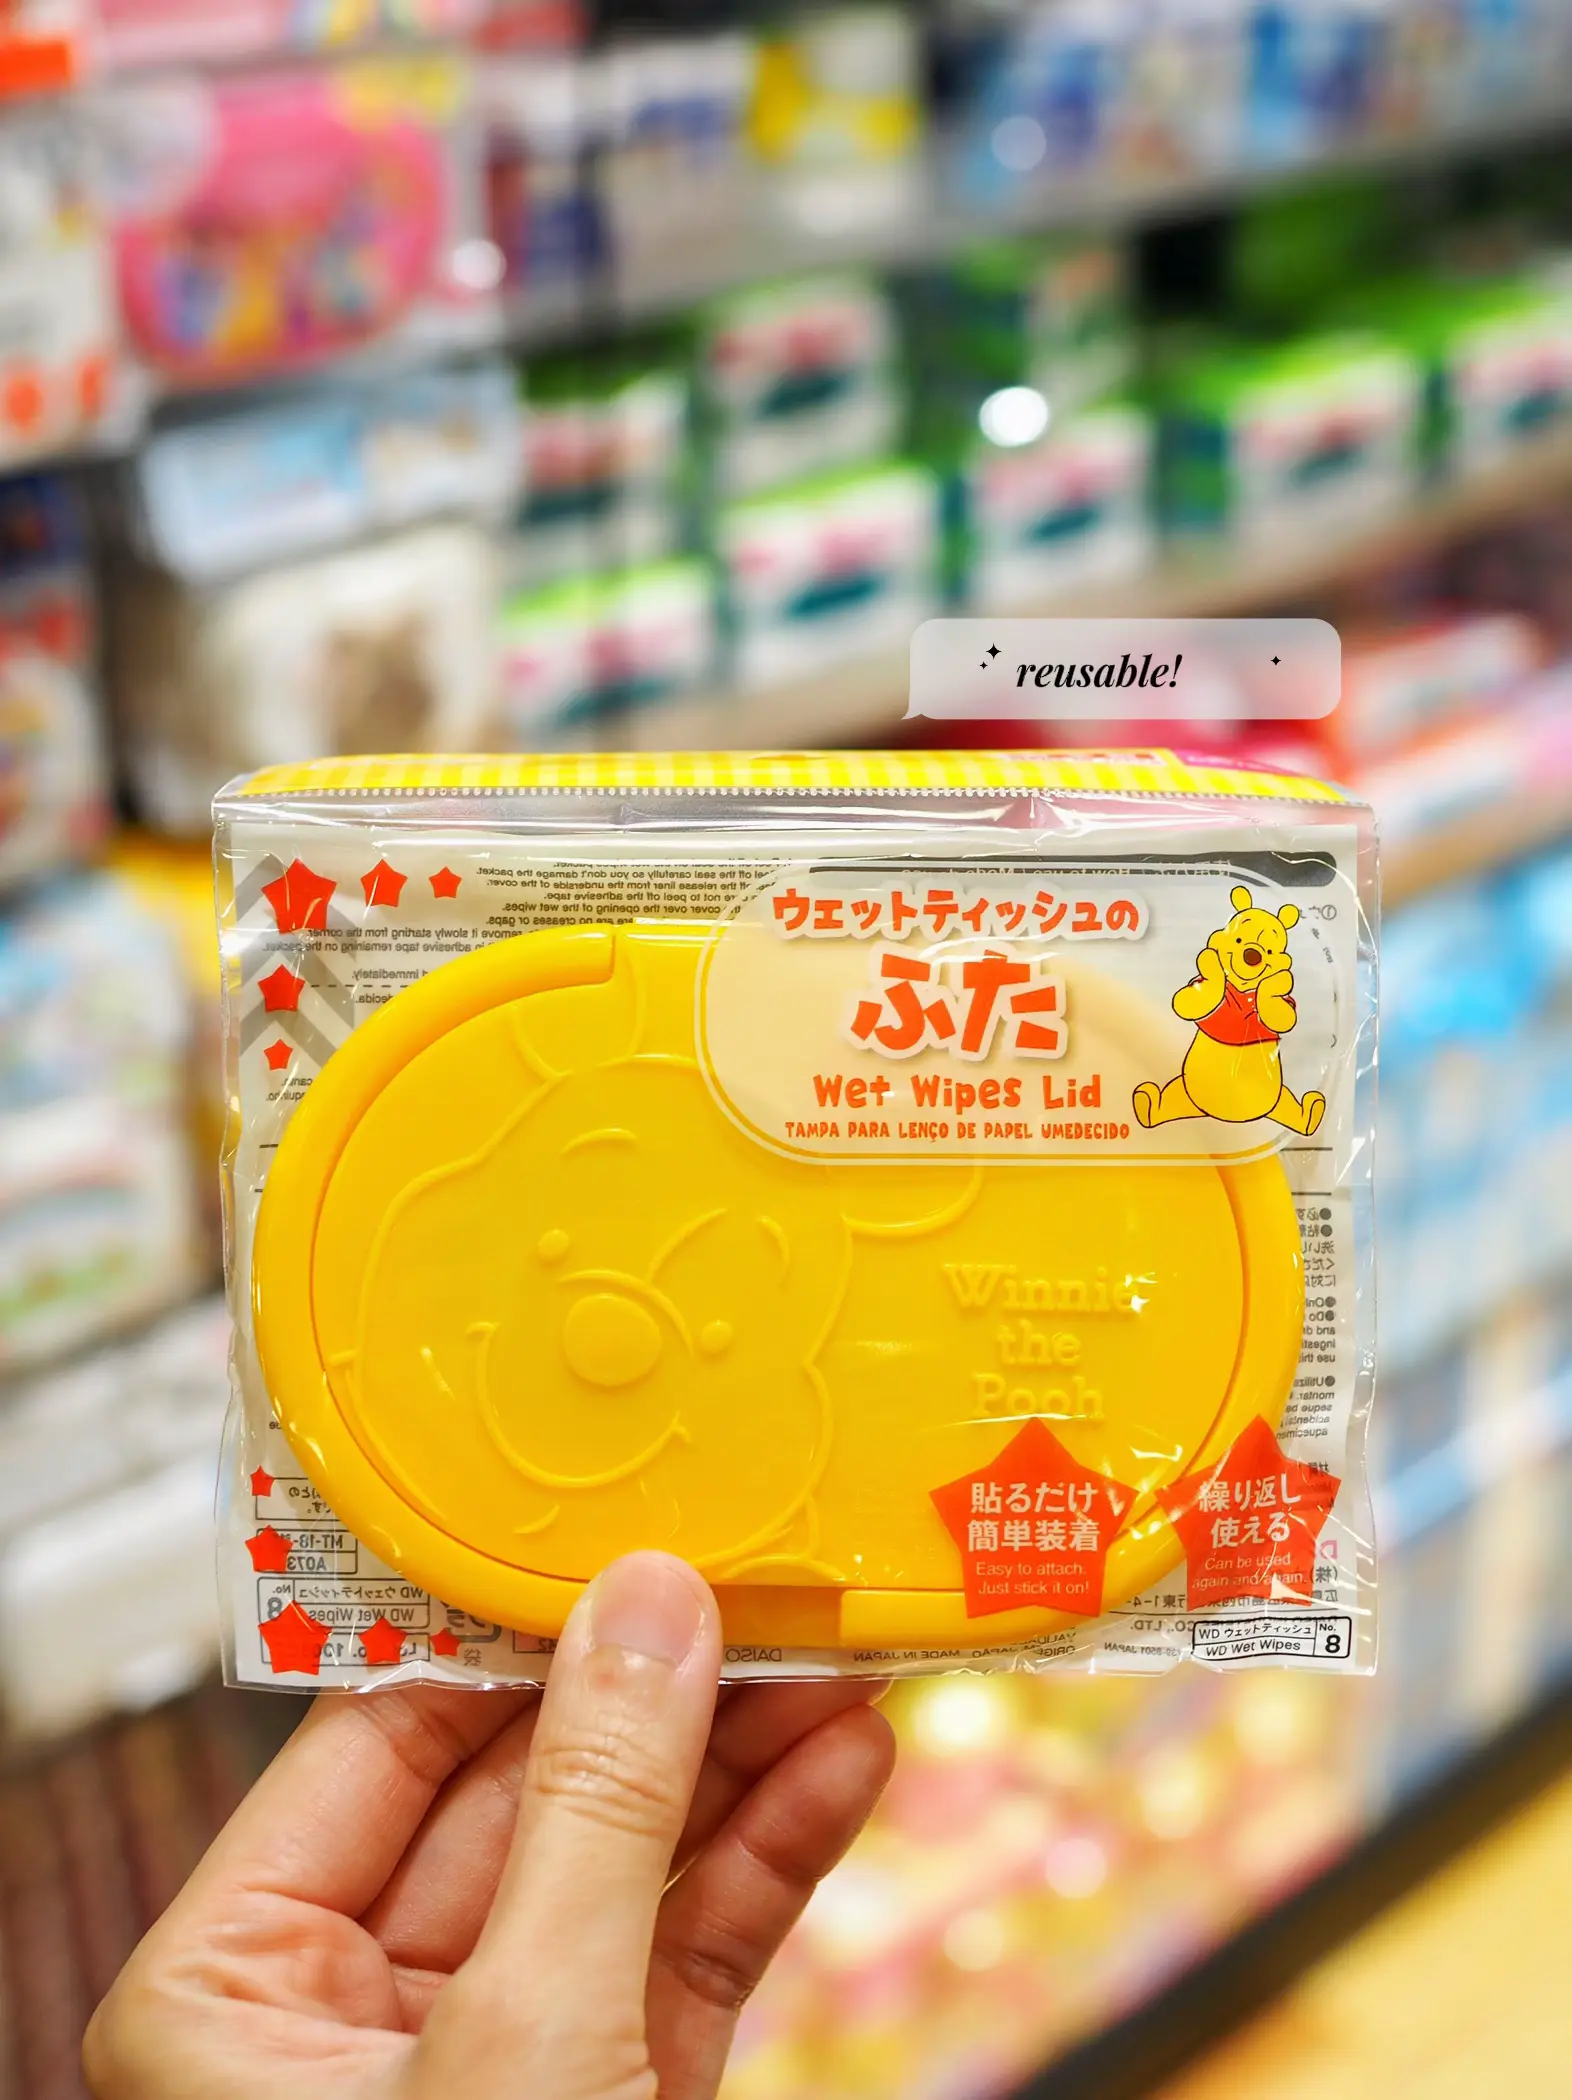 CUTEST DAISO STICKERS?! 🥹✨  Gallery posted by ⋆𐙚˚ sheryl